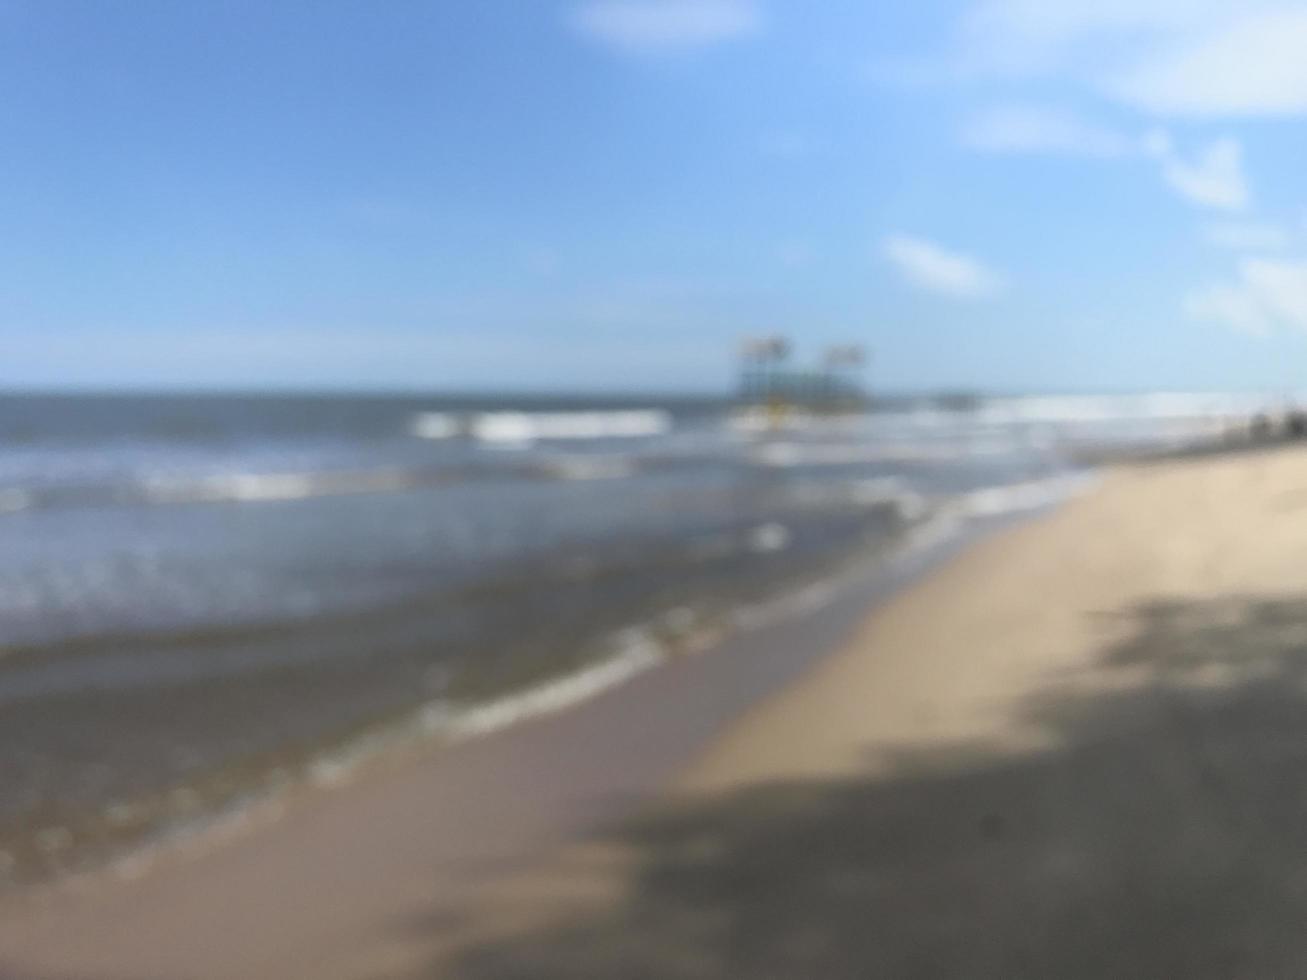 This is a beachfront photo that is out of focus or also blurry which is suitable as a background